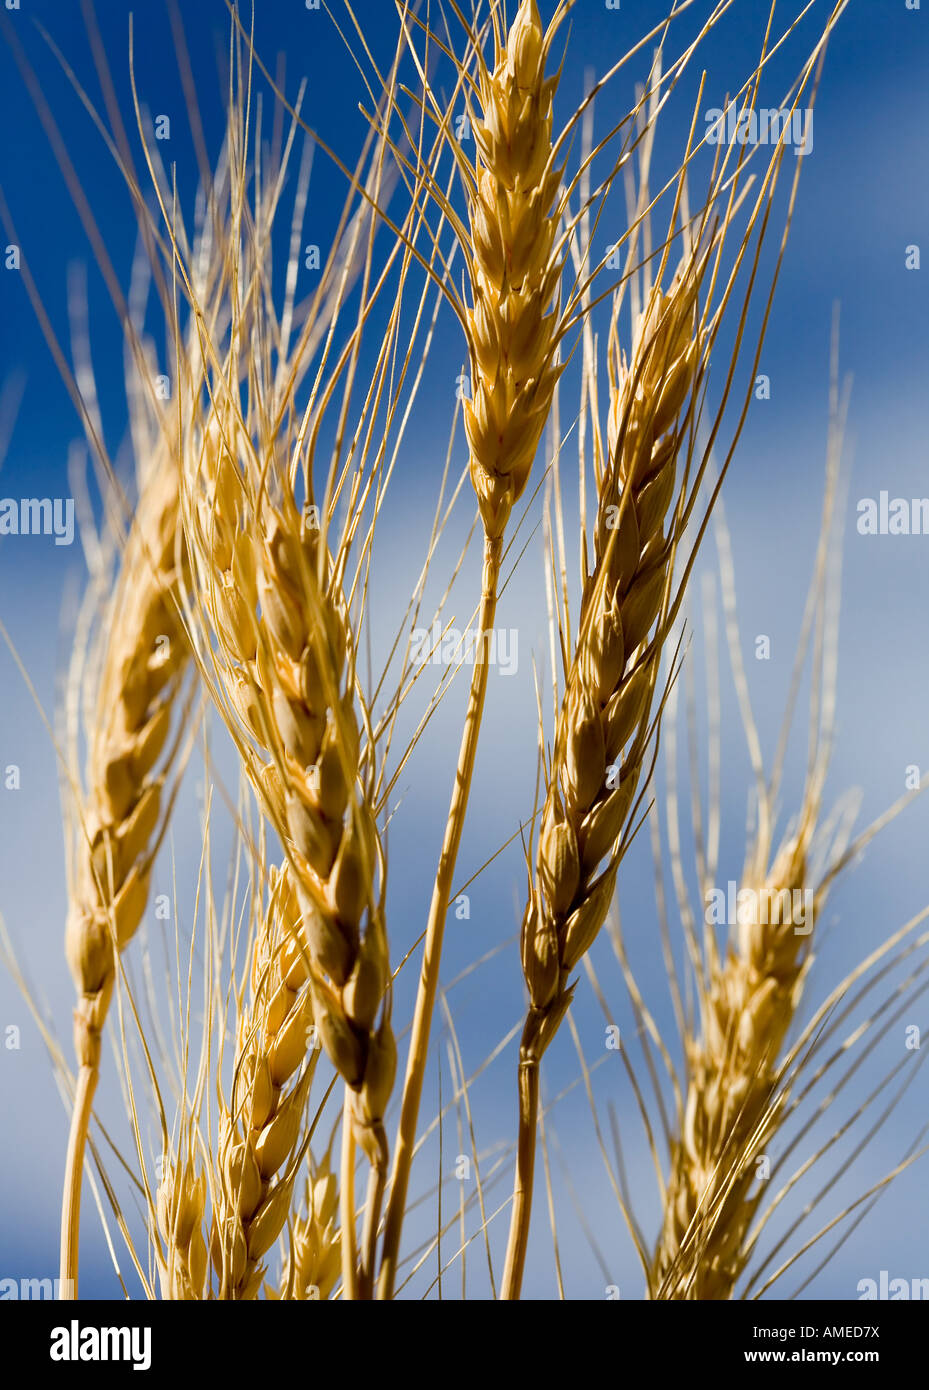 Stalks of Wheat against a Blue Sky Stock Photo